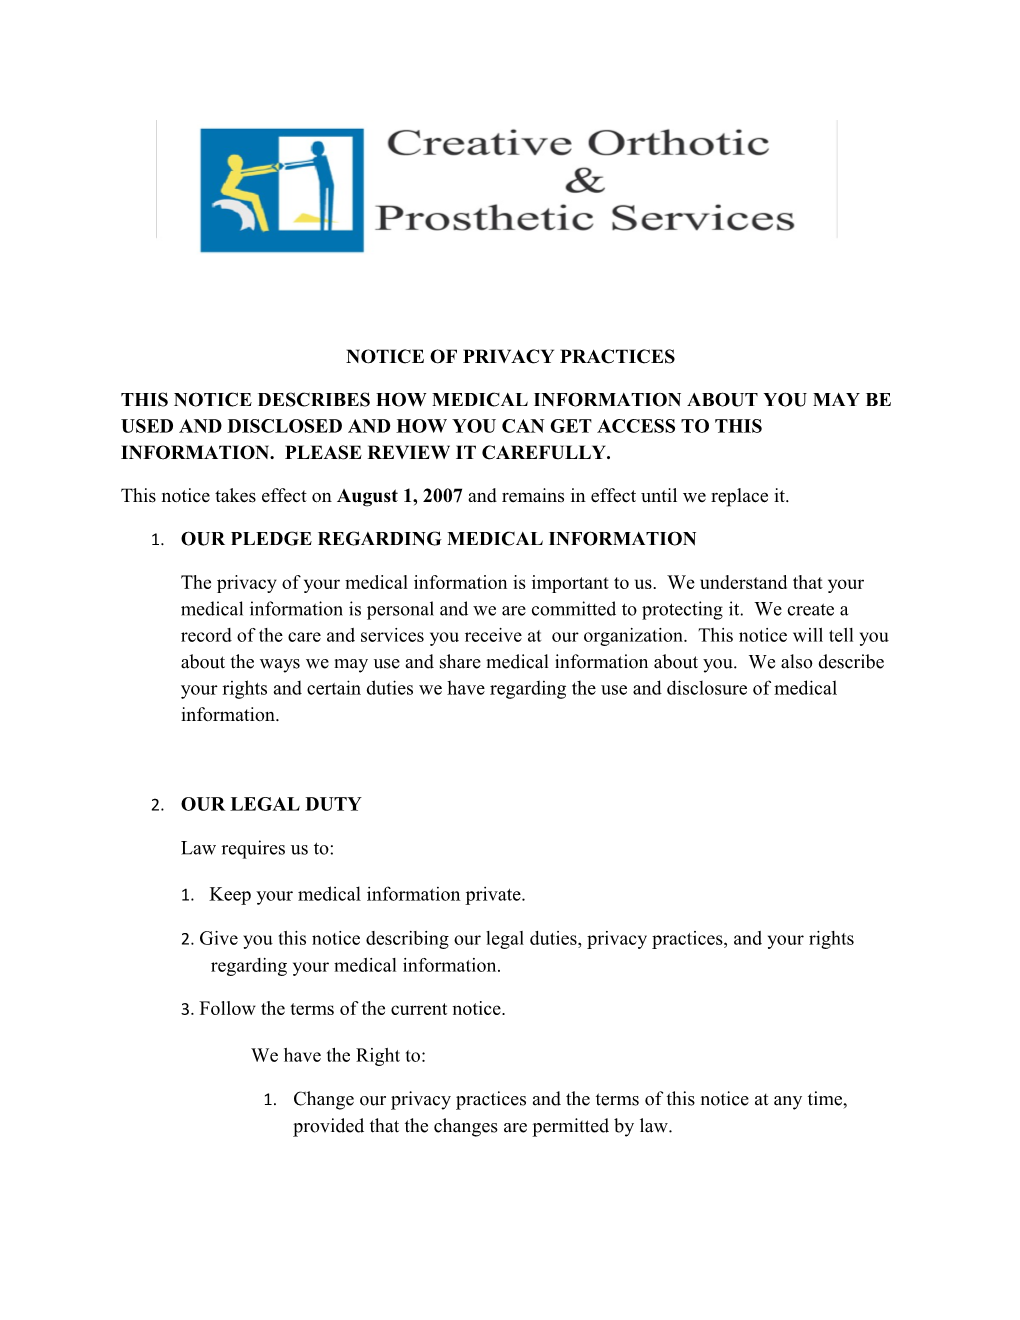 Notice of Privacy Practices s15